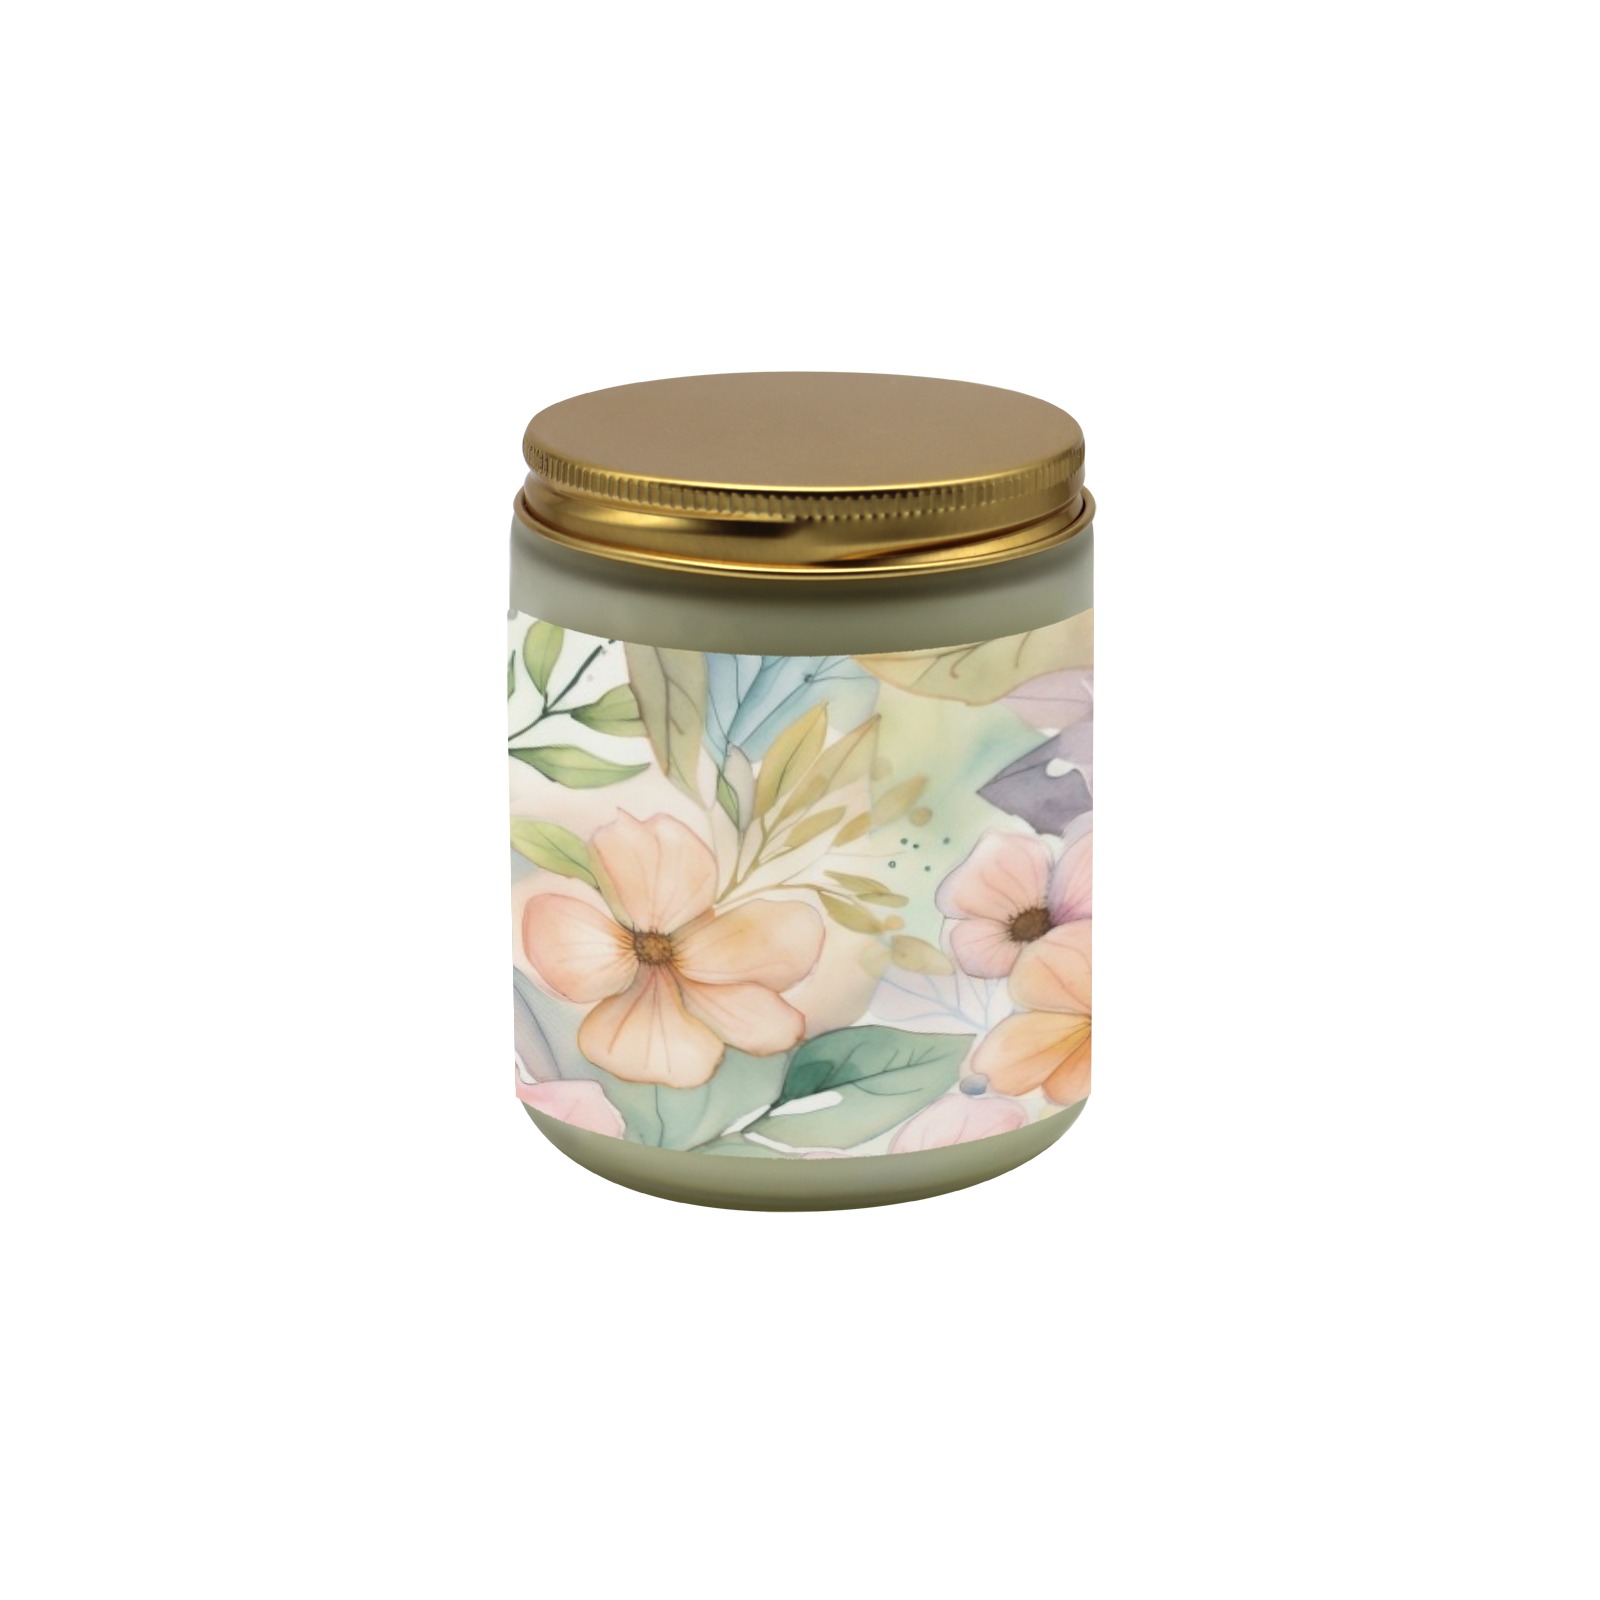 Watercolor Floral 1 Frosted Glass Candle Cup - Large Size (Lavender&Lemon)